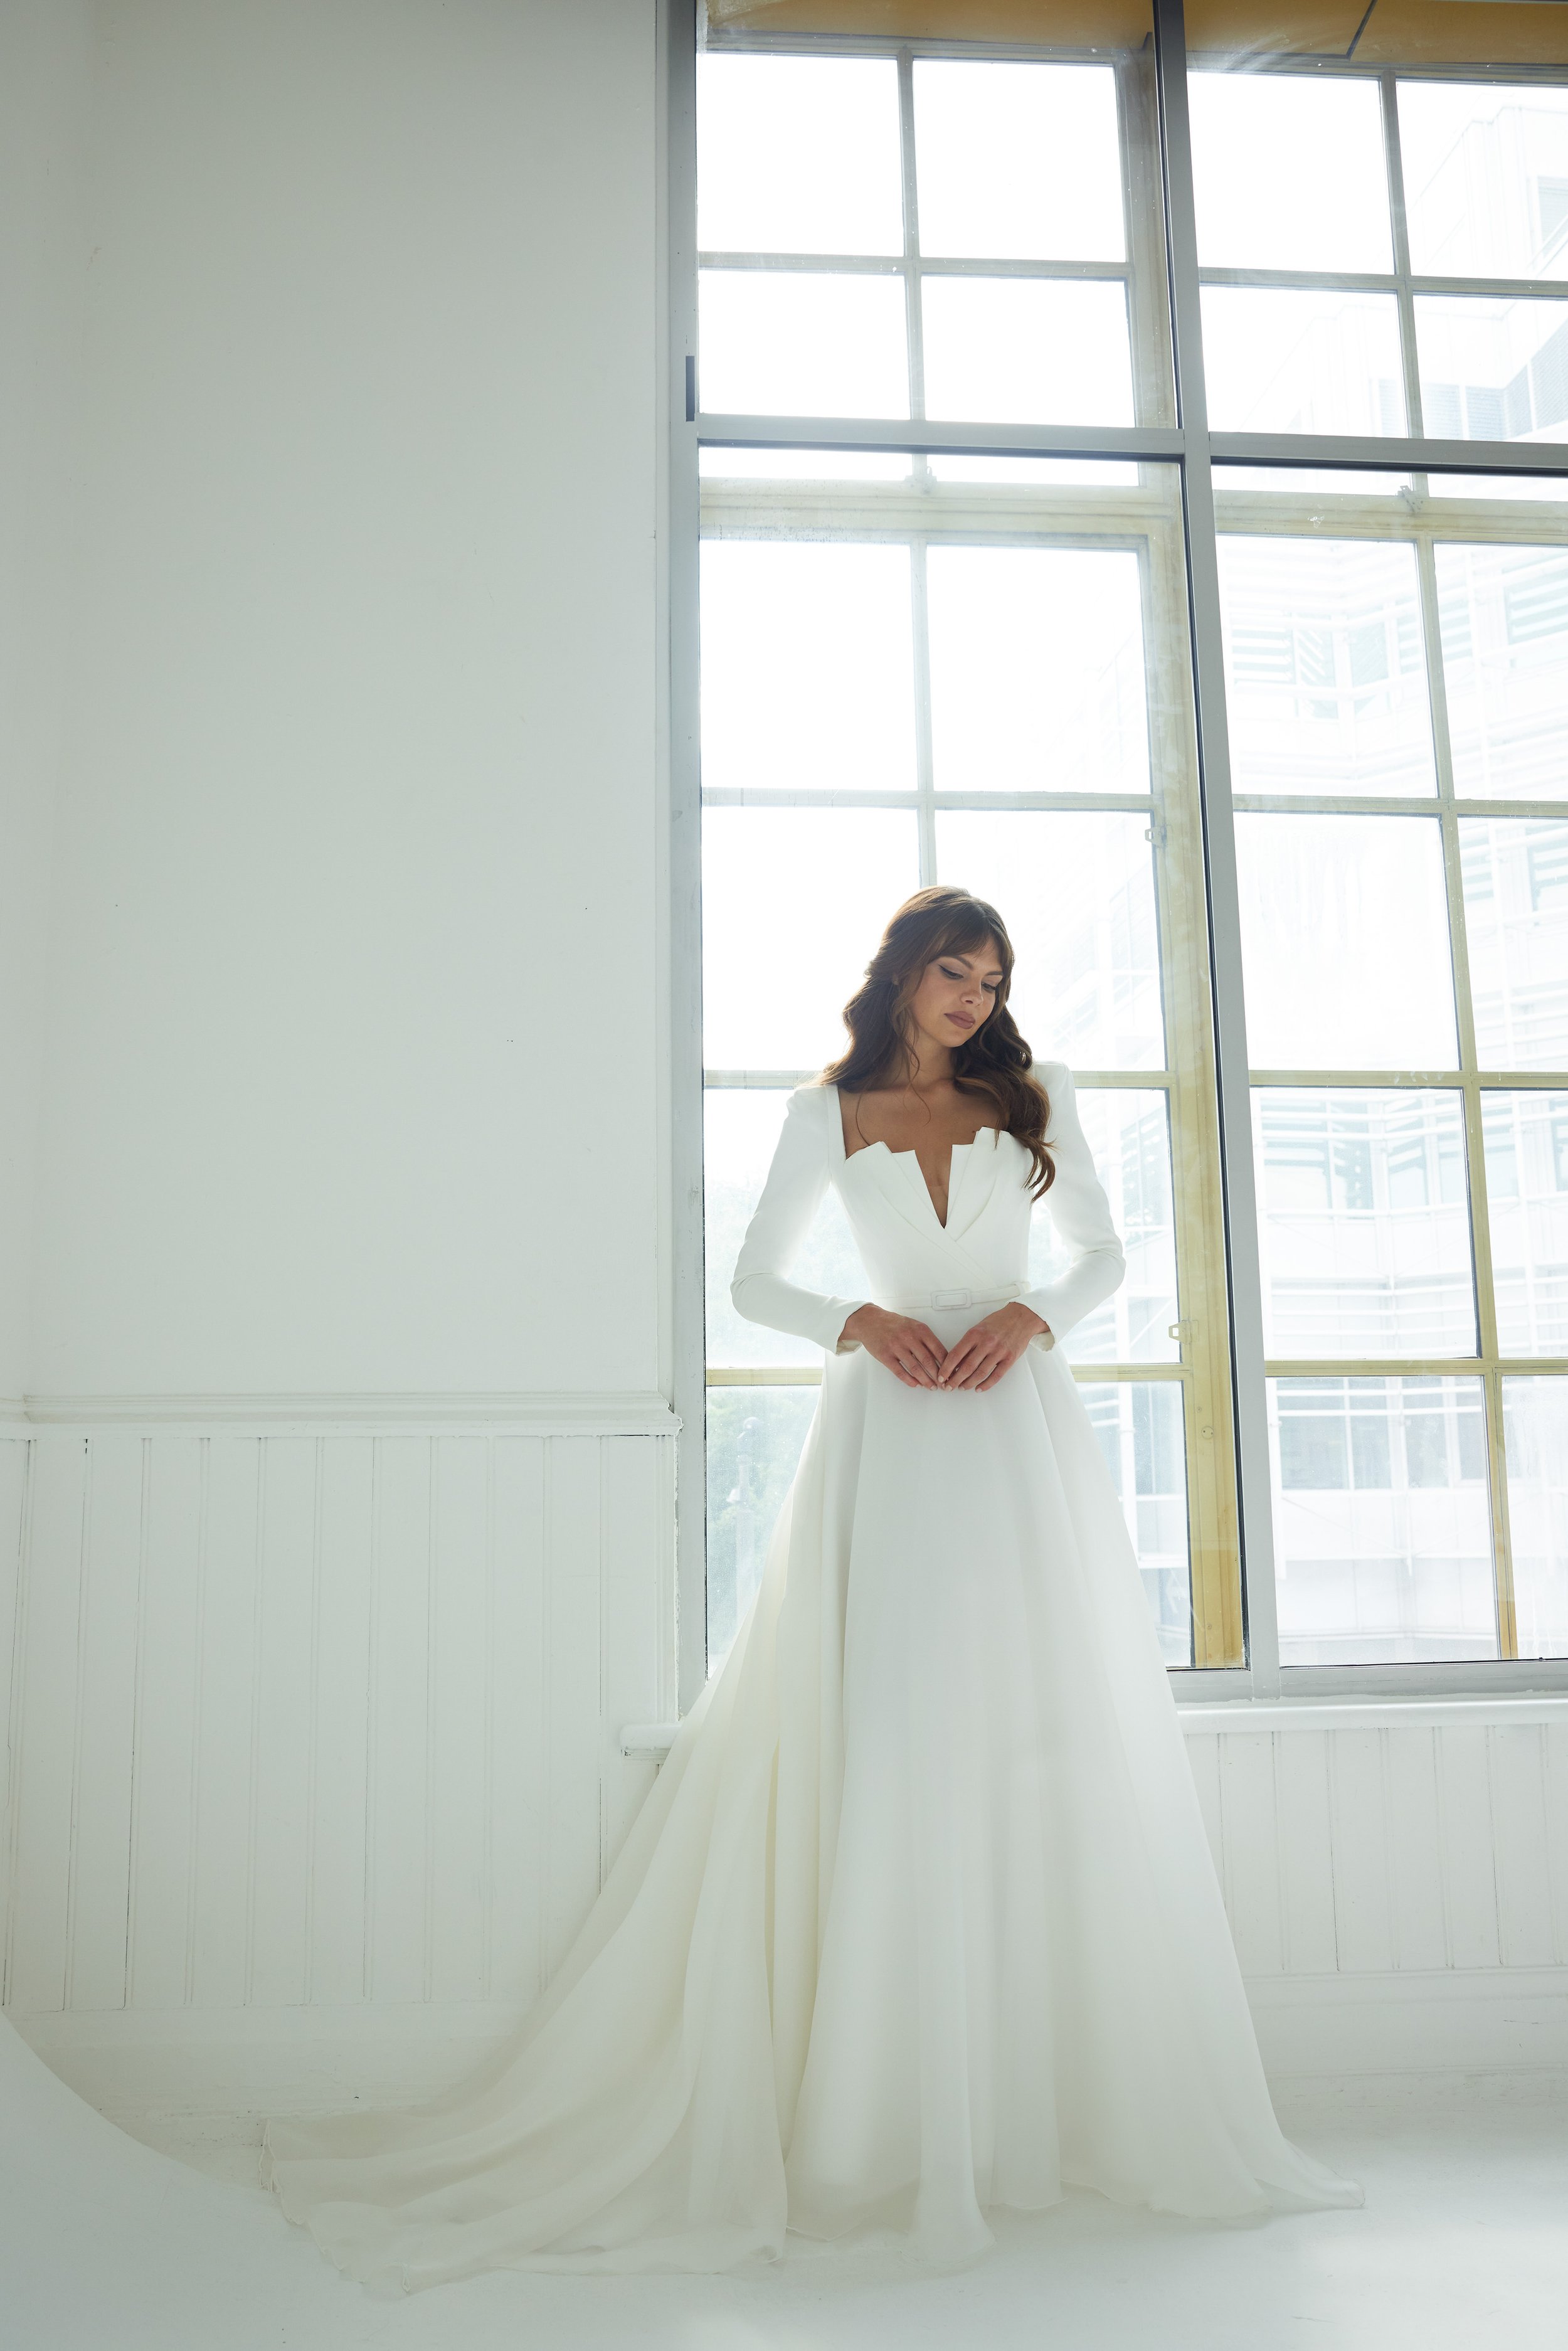 Conrad by Suzanne Neville at Frances Day Bridal 